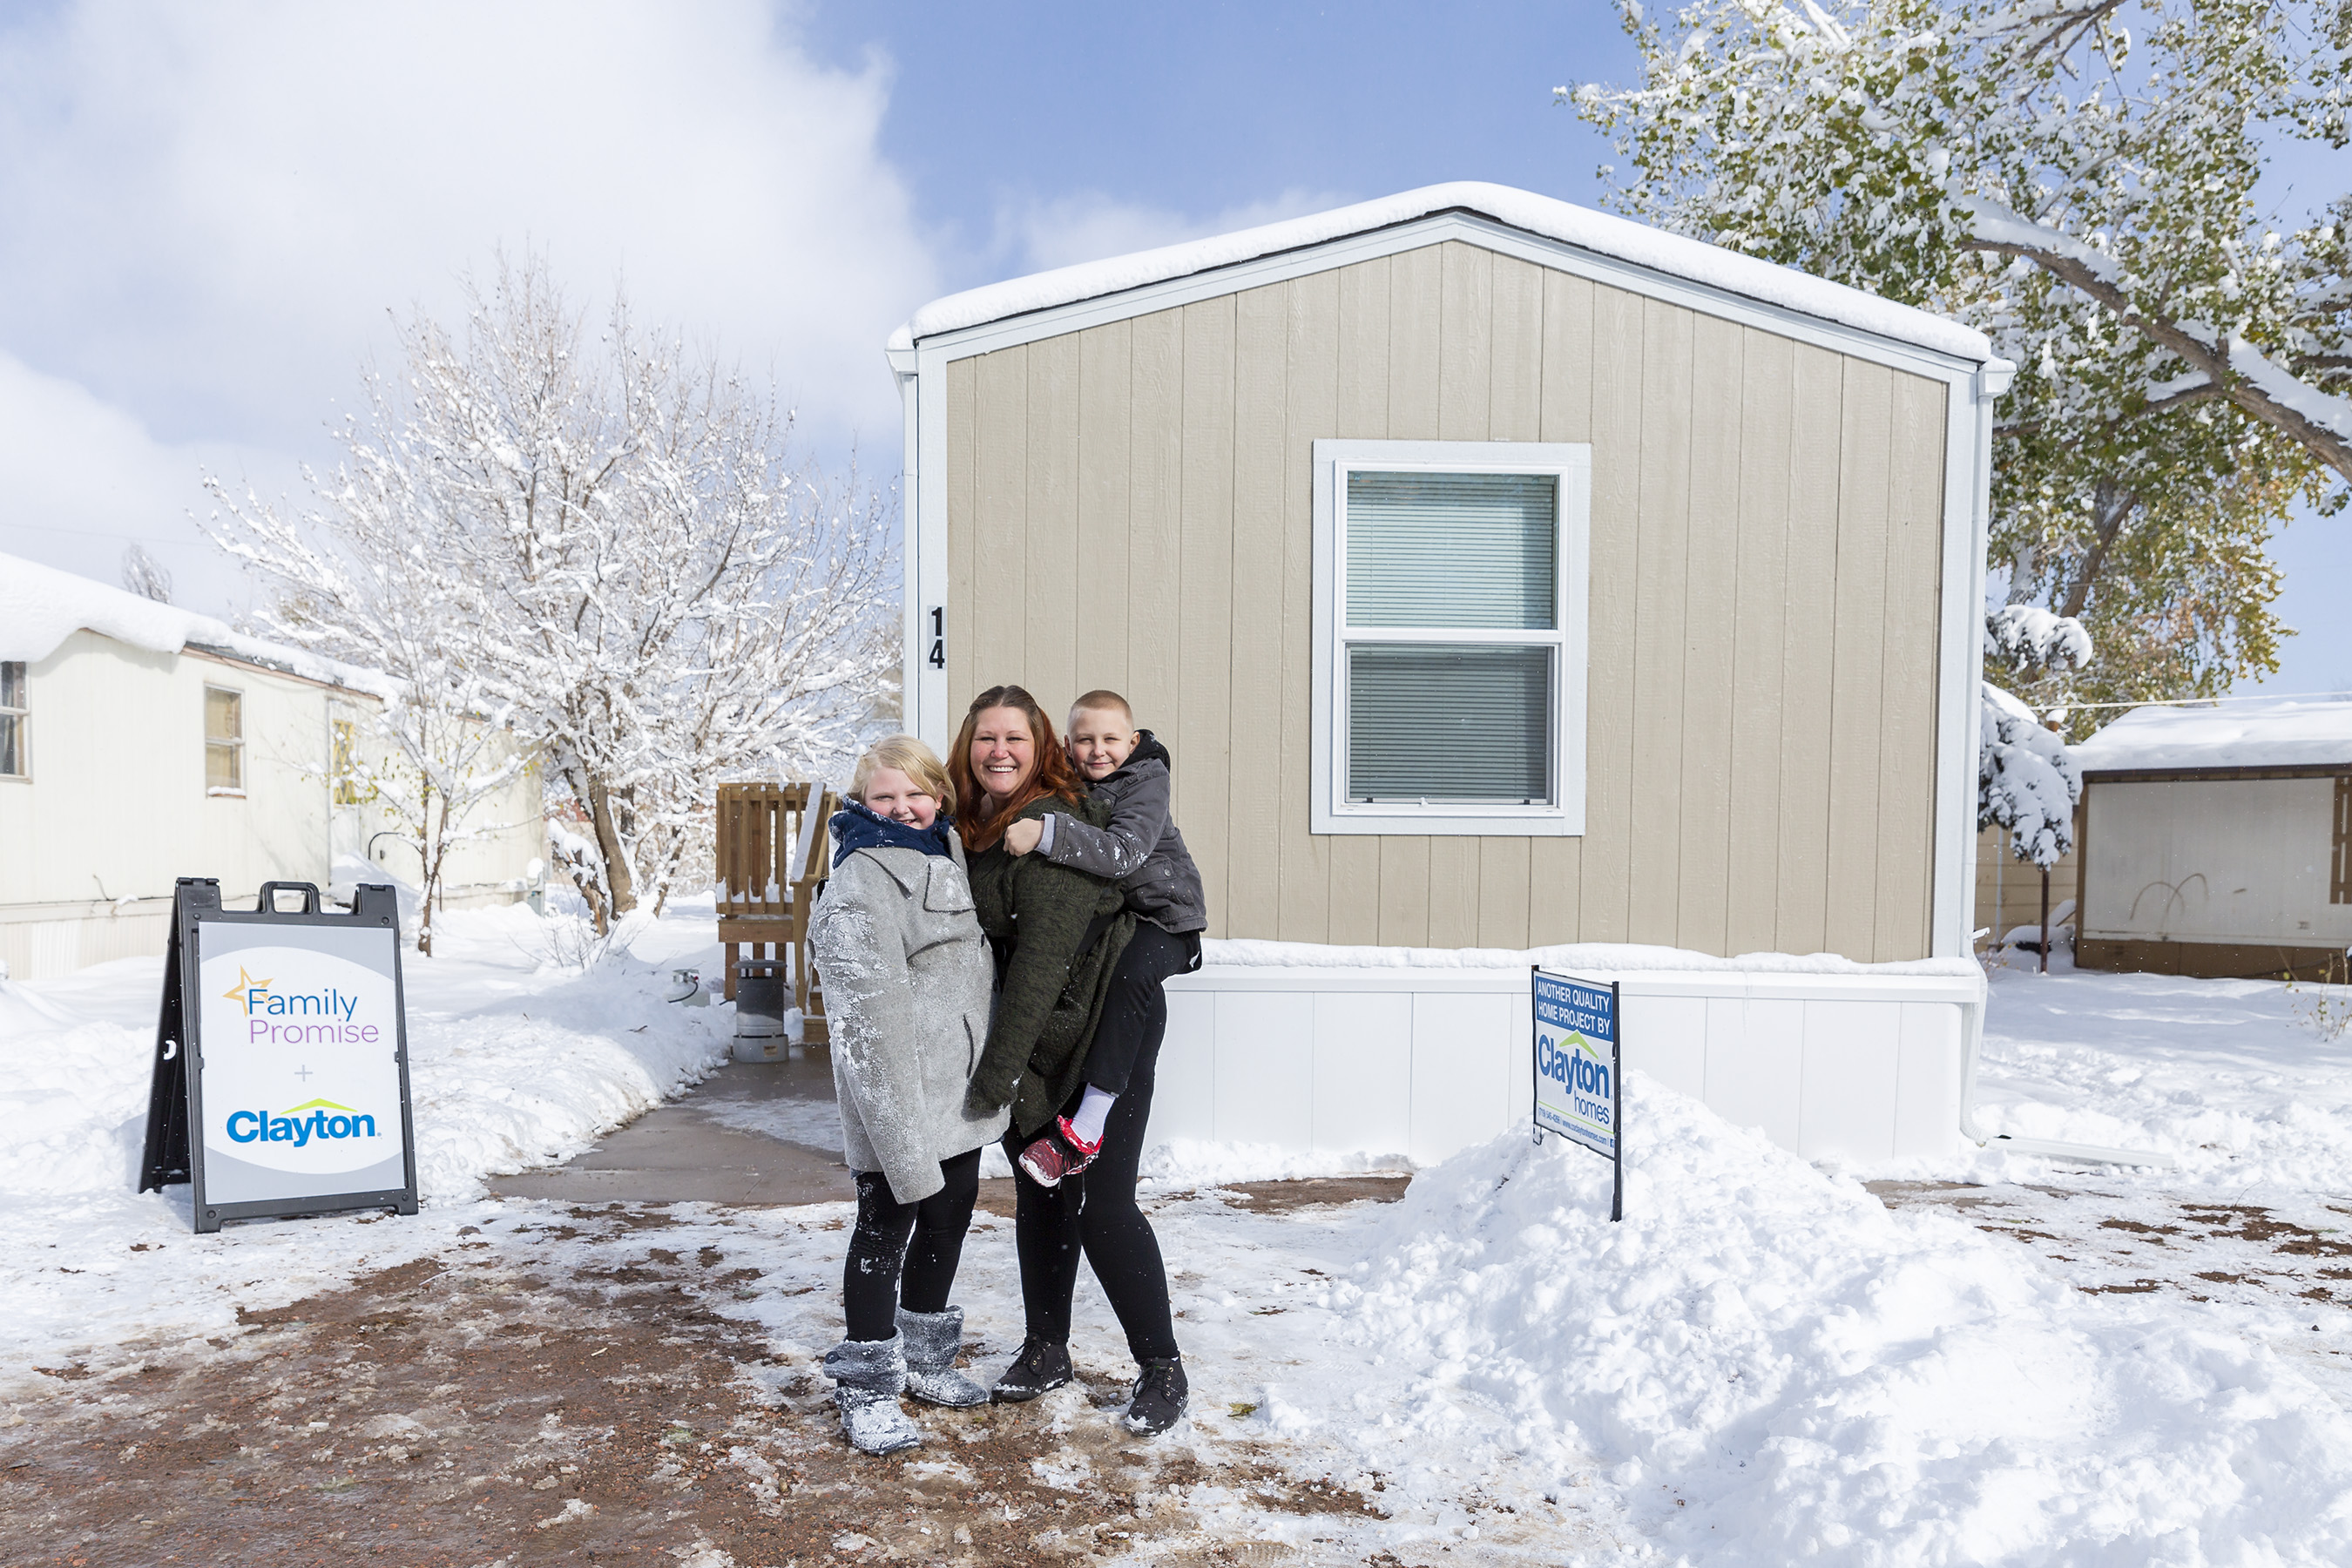 Sara and her children are joining Rocky Mountain Homeowners Co-Op where they will be welcomed as neighbors into a thriving, sustainable resident-owned community.